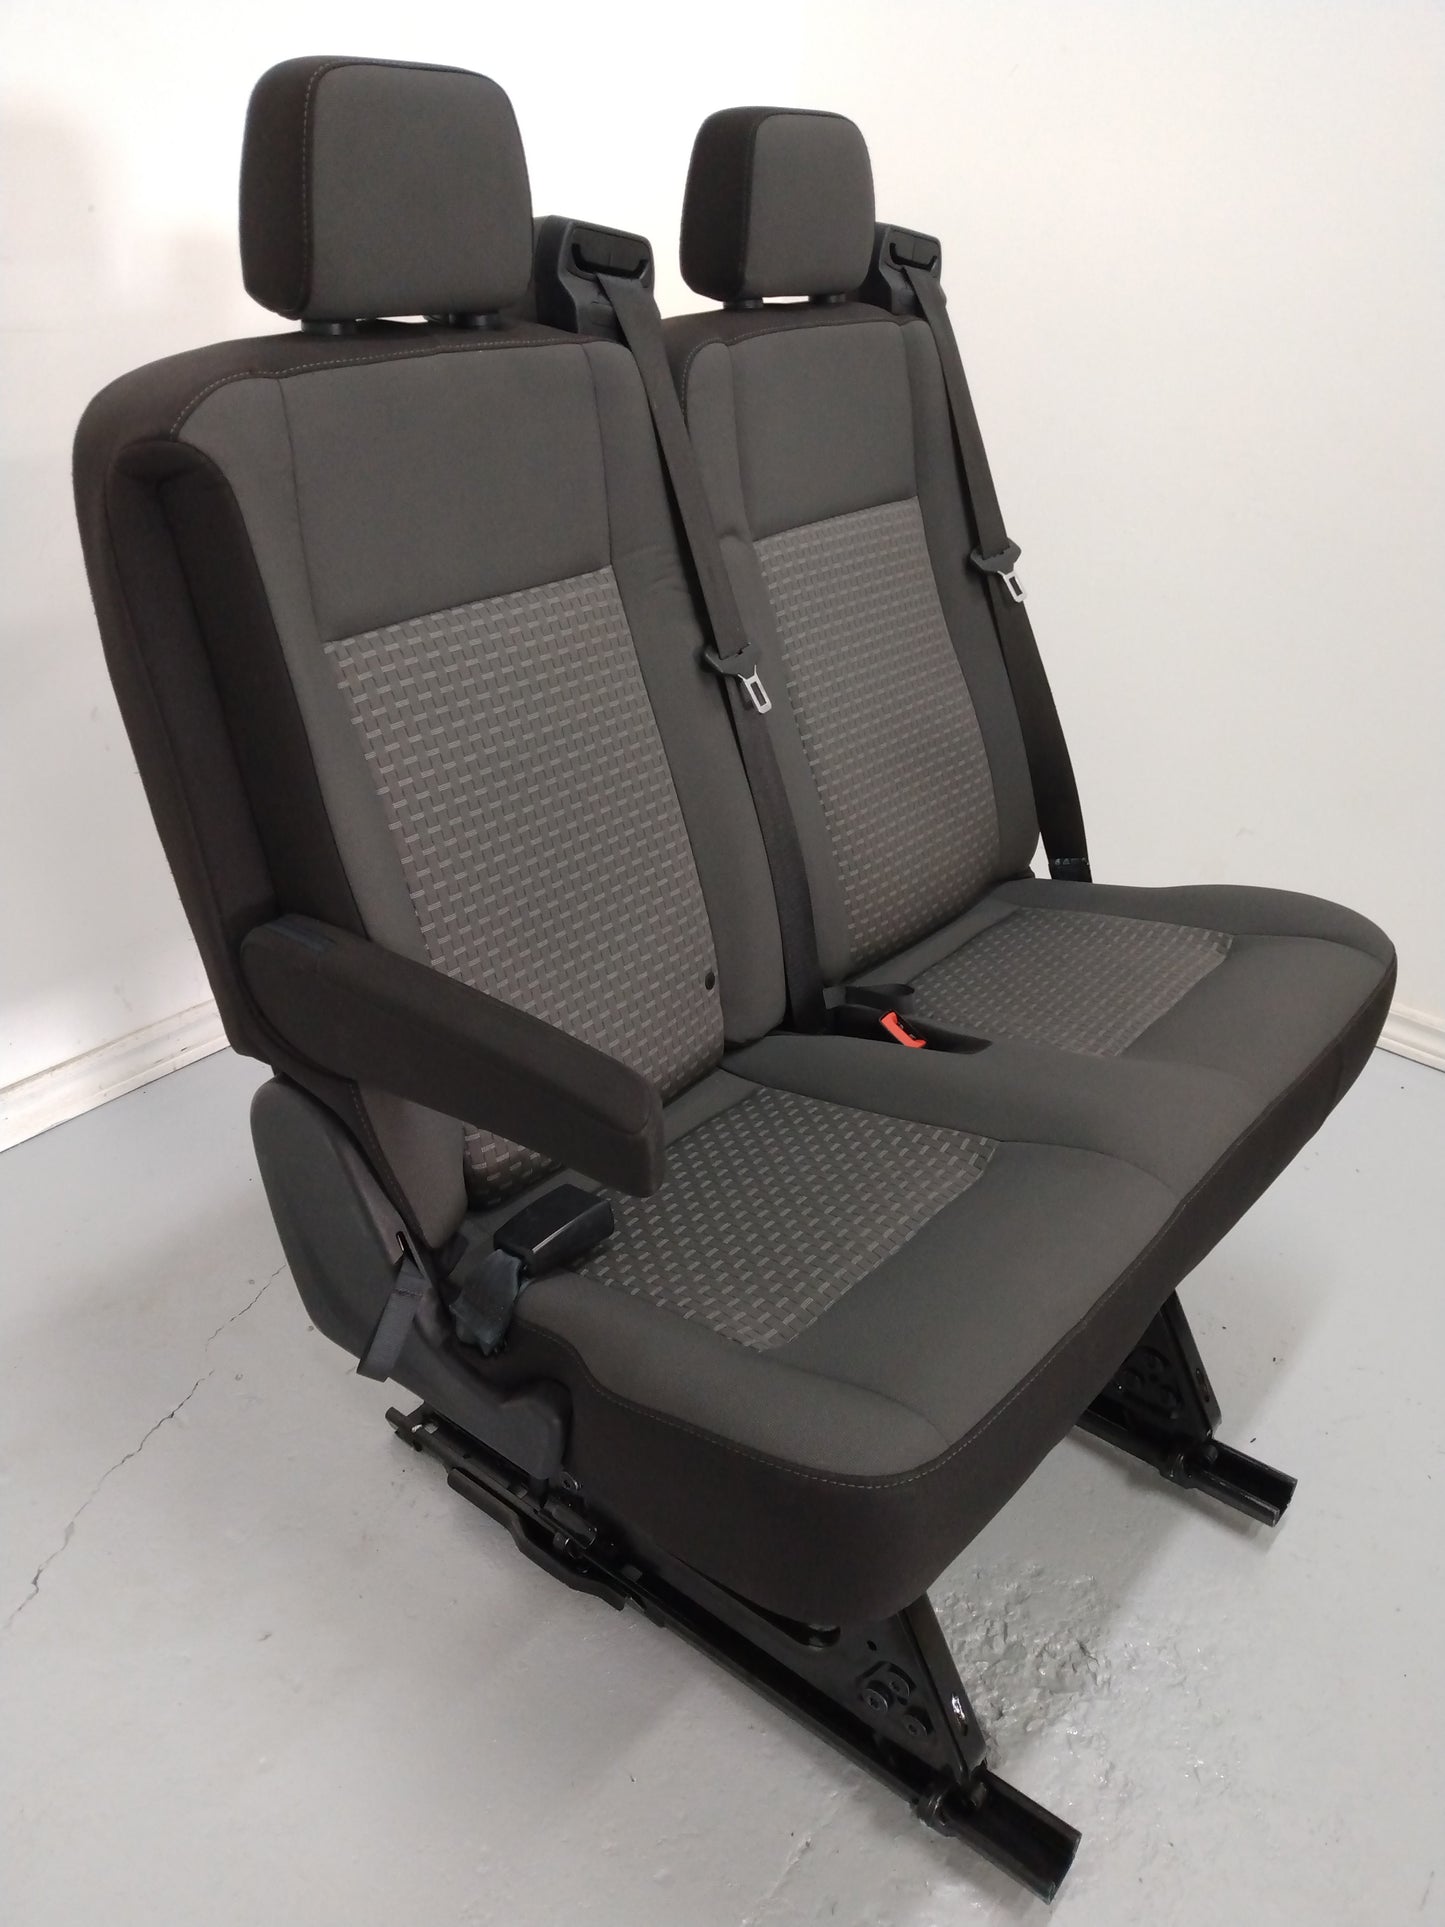 Ford Transit Passenger Van 2022 Black Cloth Quick Release Universal Fit 2 Person Double Bench Seat 36 in. Left VANLIFE Cargo Camper Savanna Express